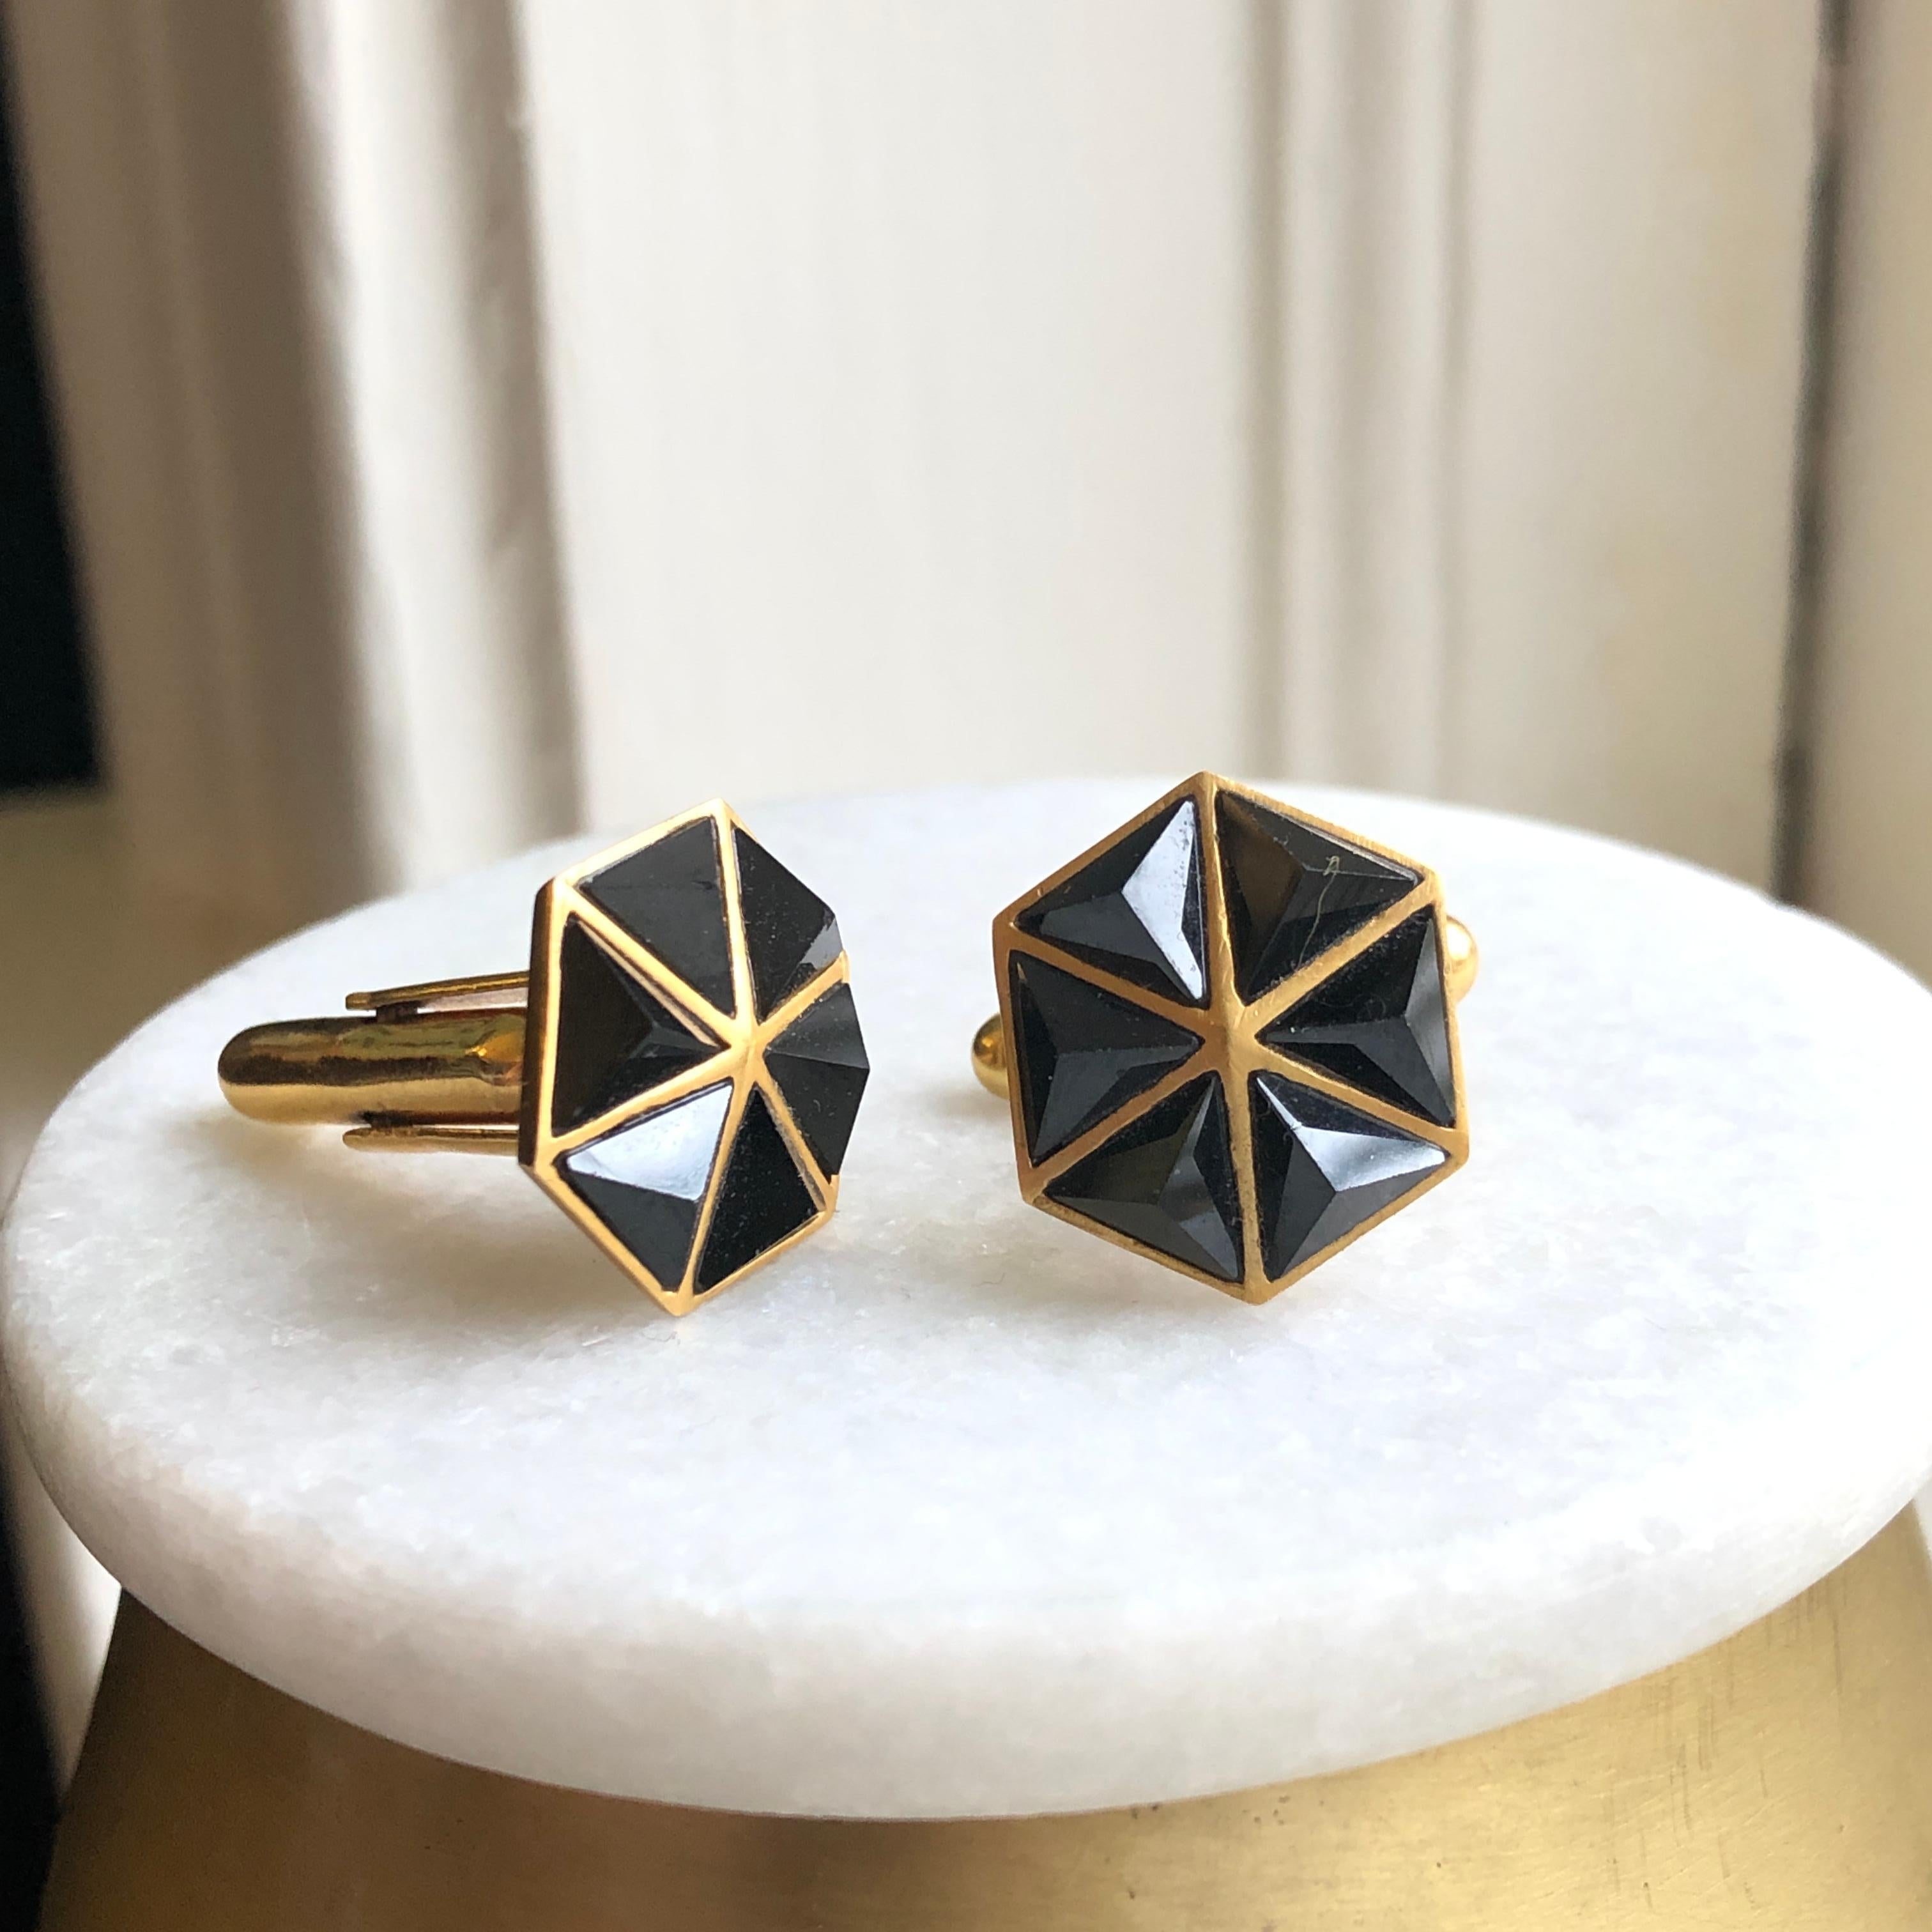 Set yourself apart with these stunning Black Spinel and 18kt Gold Cufflinks designed by award winning jewelry designer, Lauren Harper.  Each Black Spinel pyramid is hand faceted in a masculine, edgy cut, making these cufflinks the ultimate